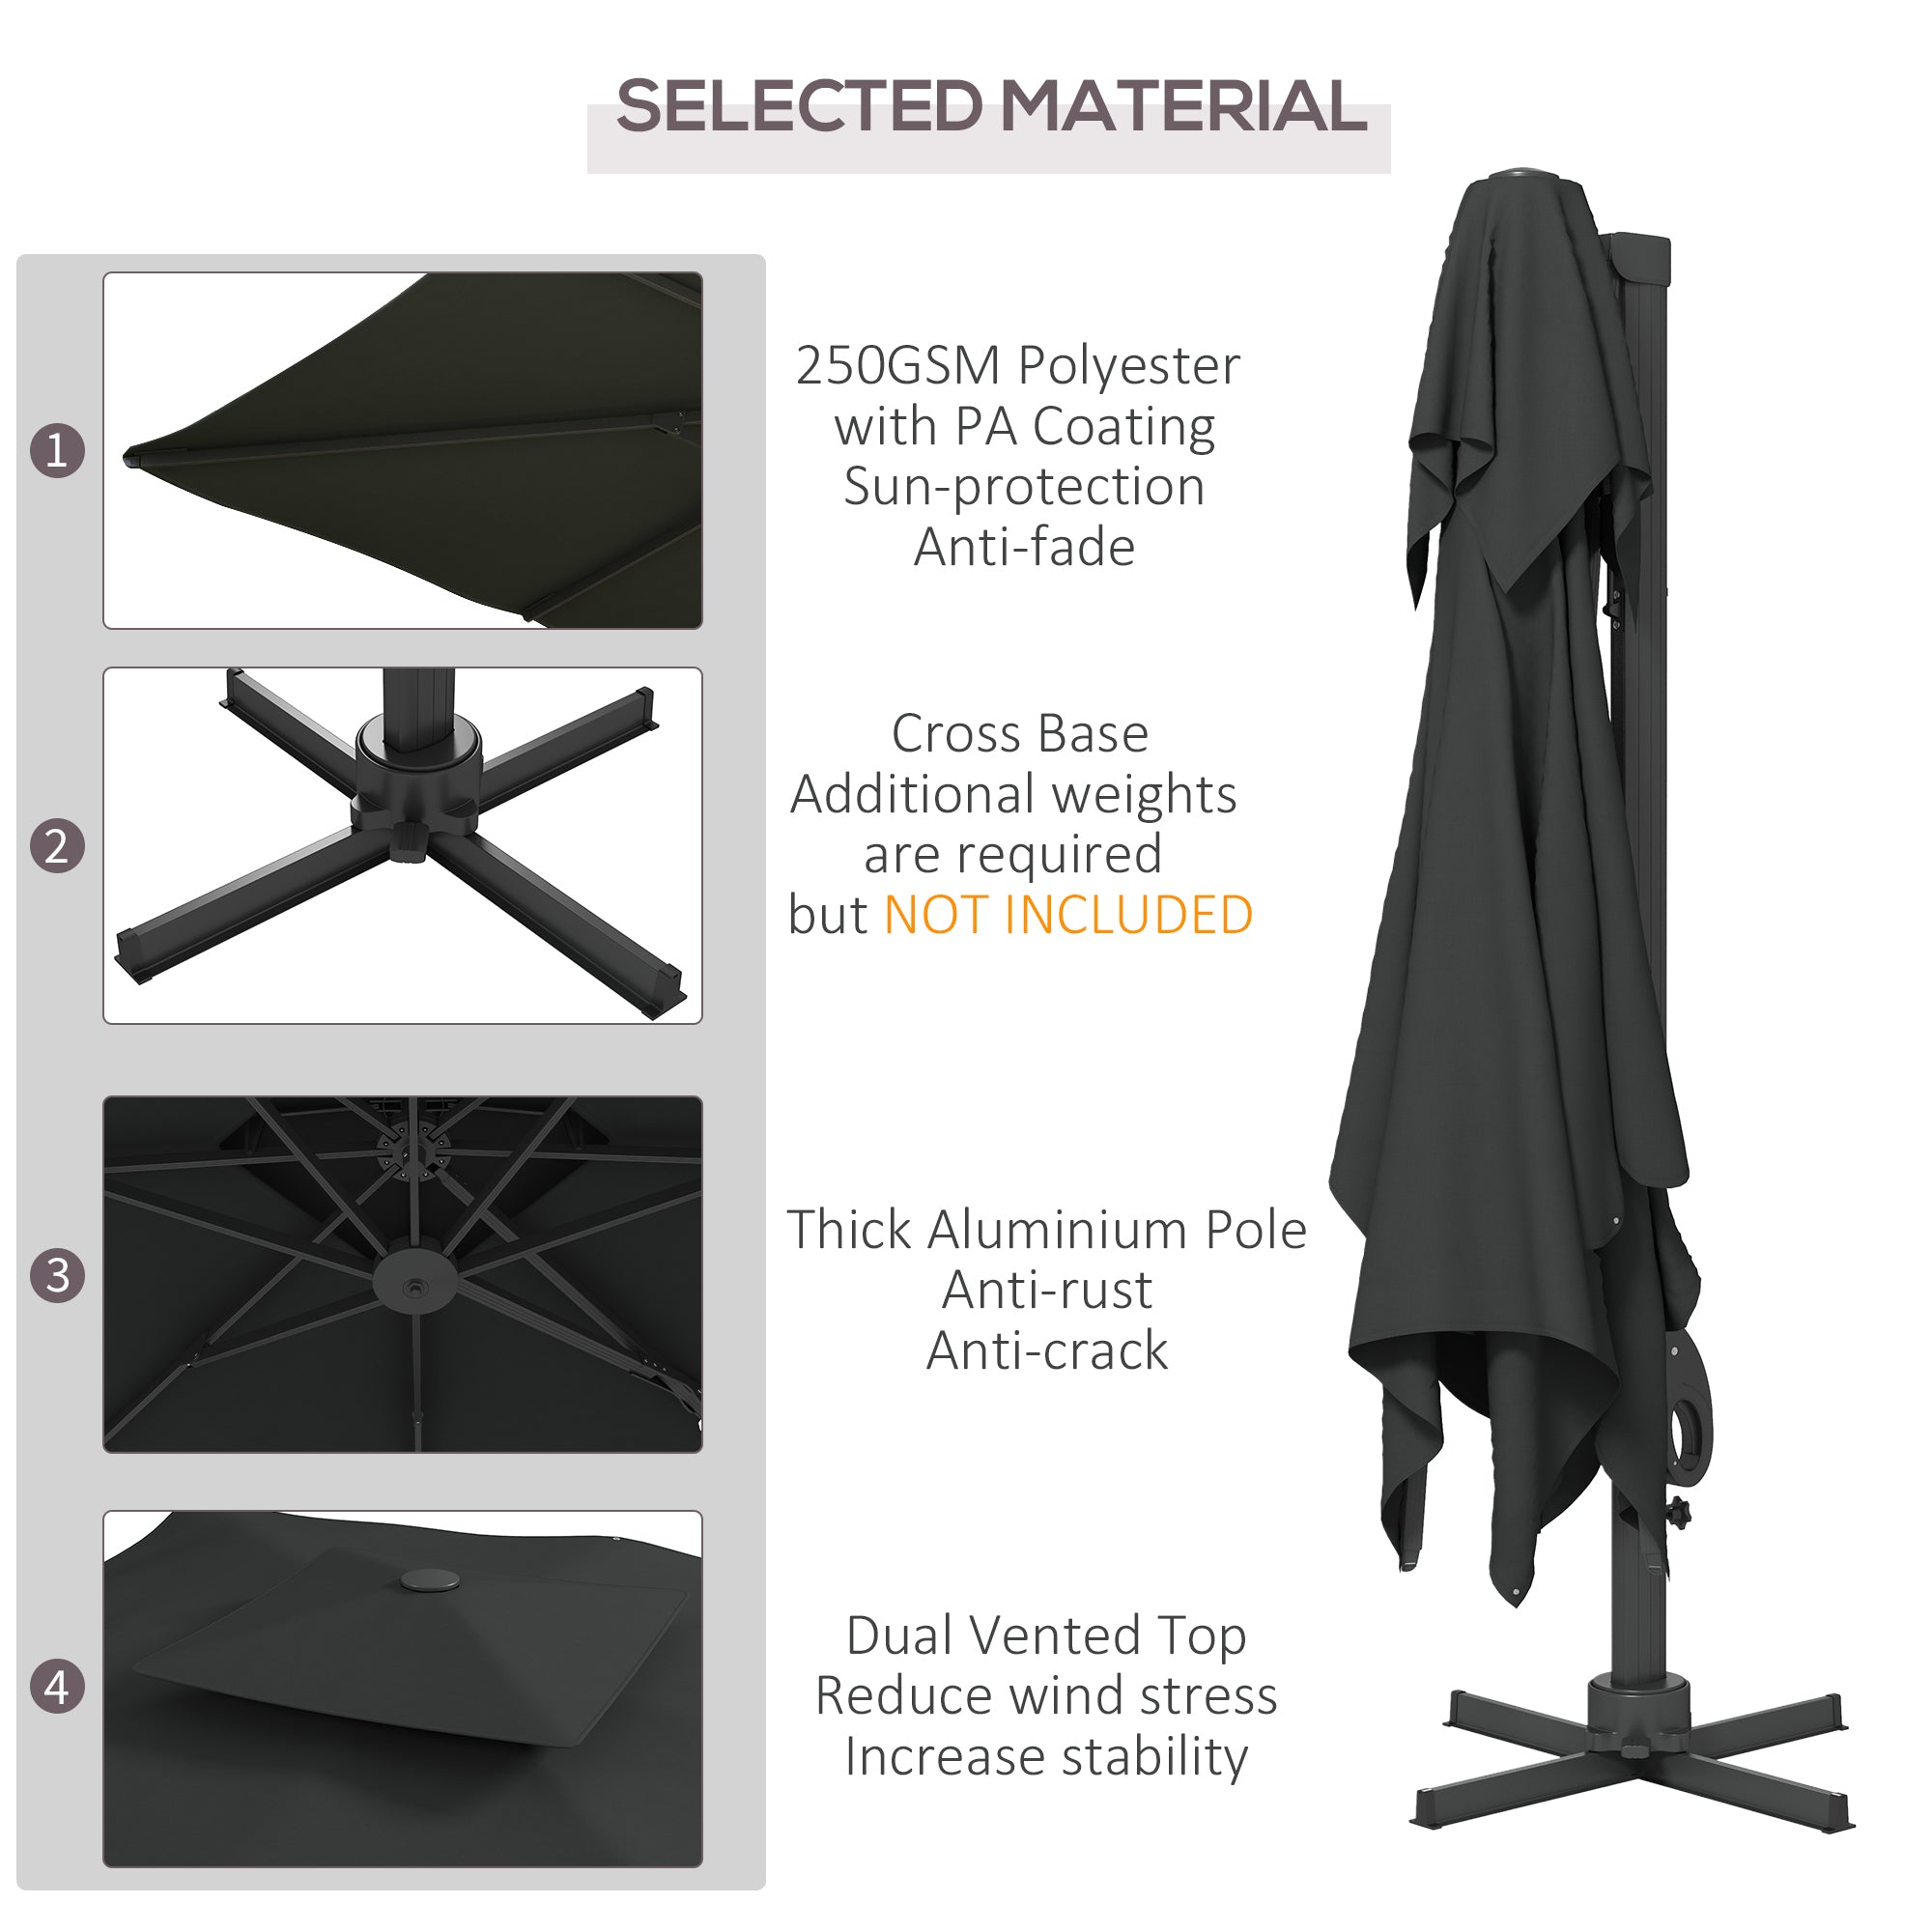 Garden Parasol, 3(m) Cantilever Parasol with Hydraulic Mechanism, Dual Vented Top, 8 Ribs, Cross Base, Grey-3